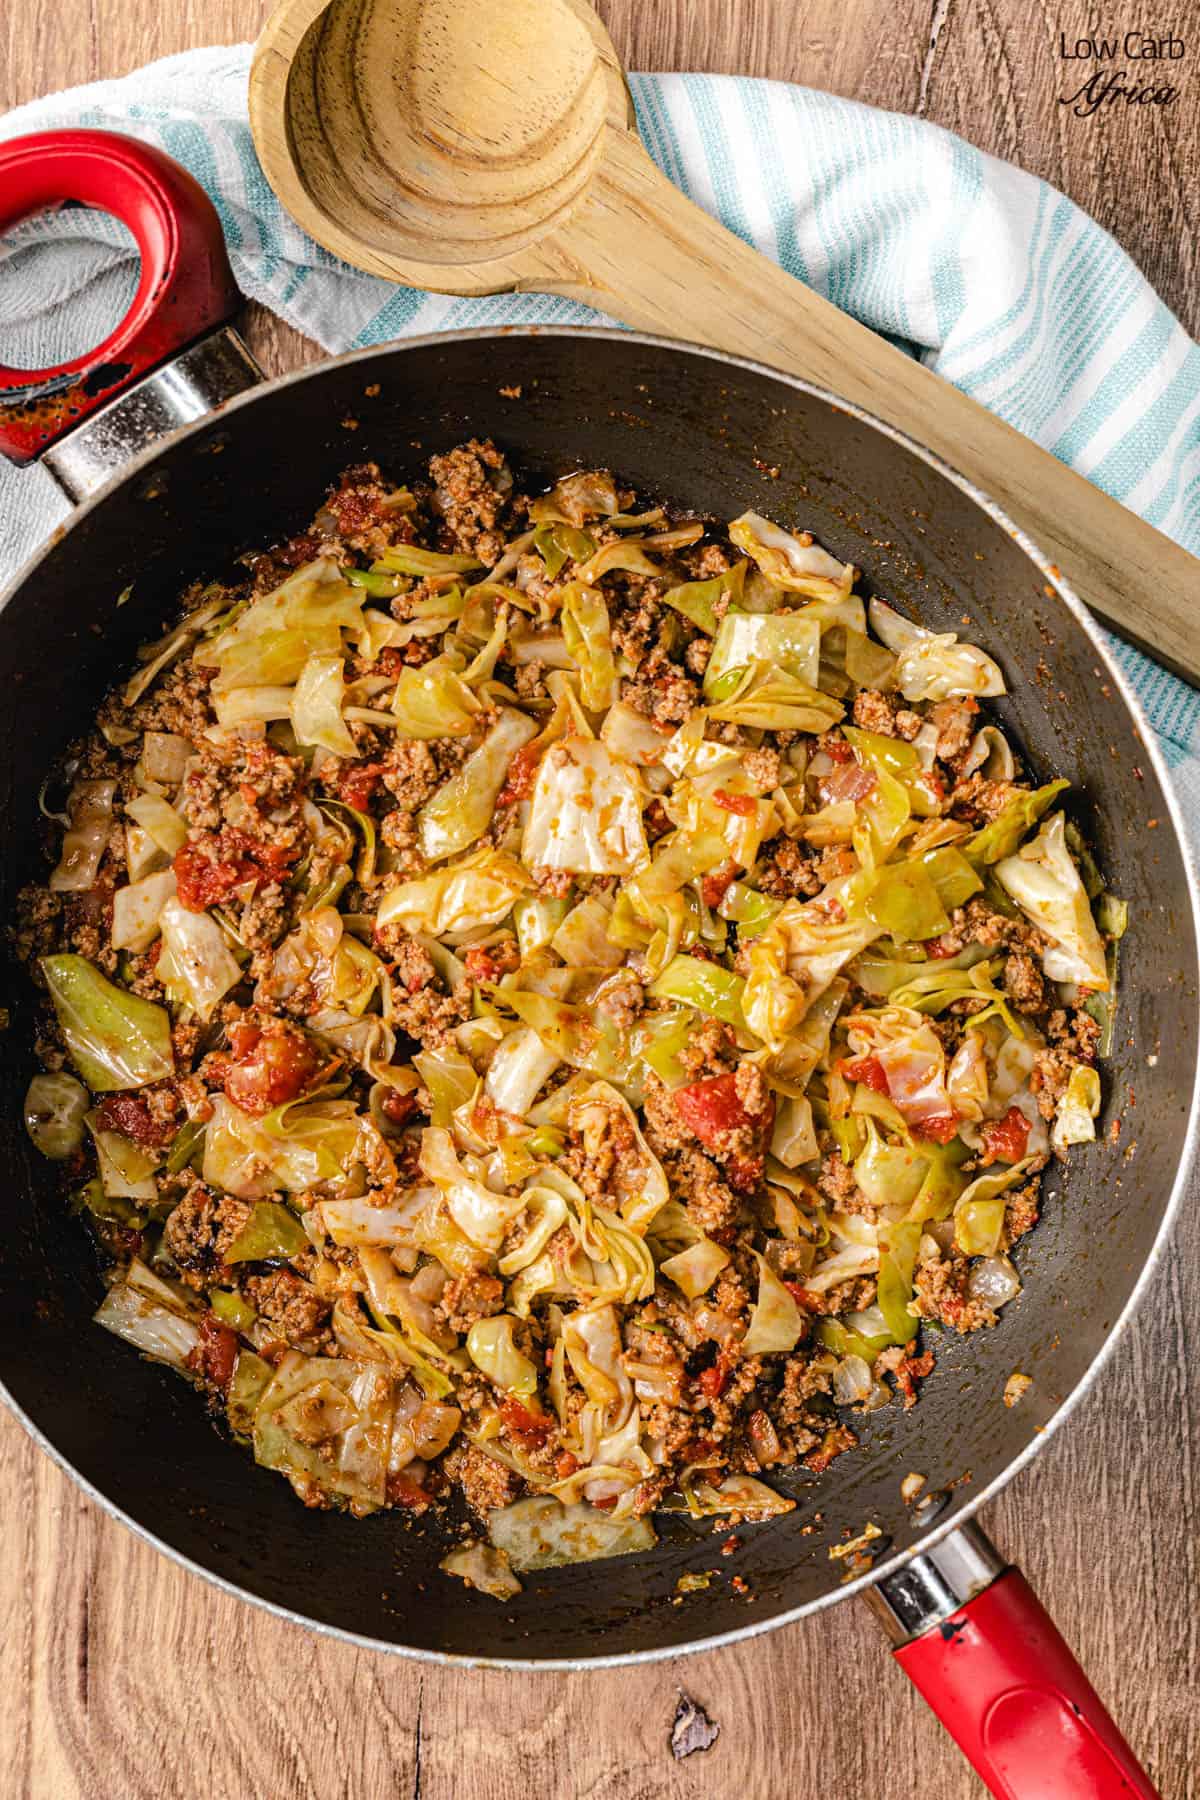 Cabbage and minced meat in a frying pan